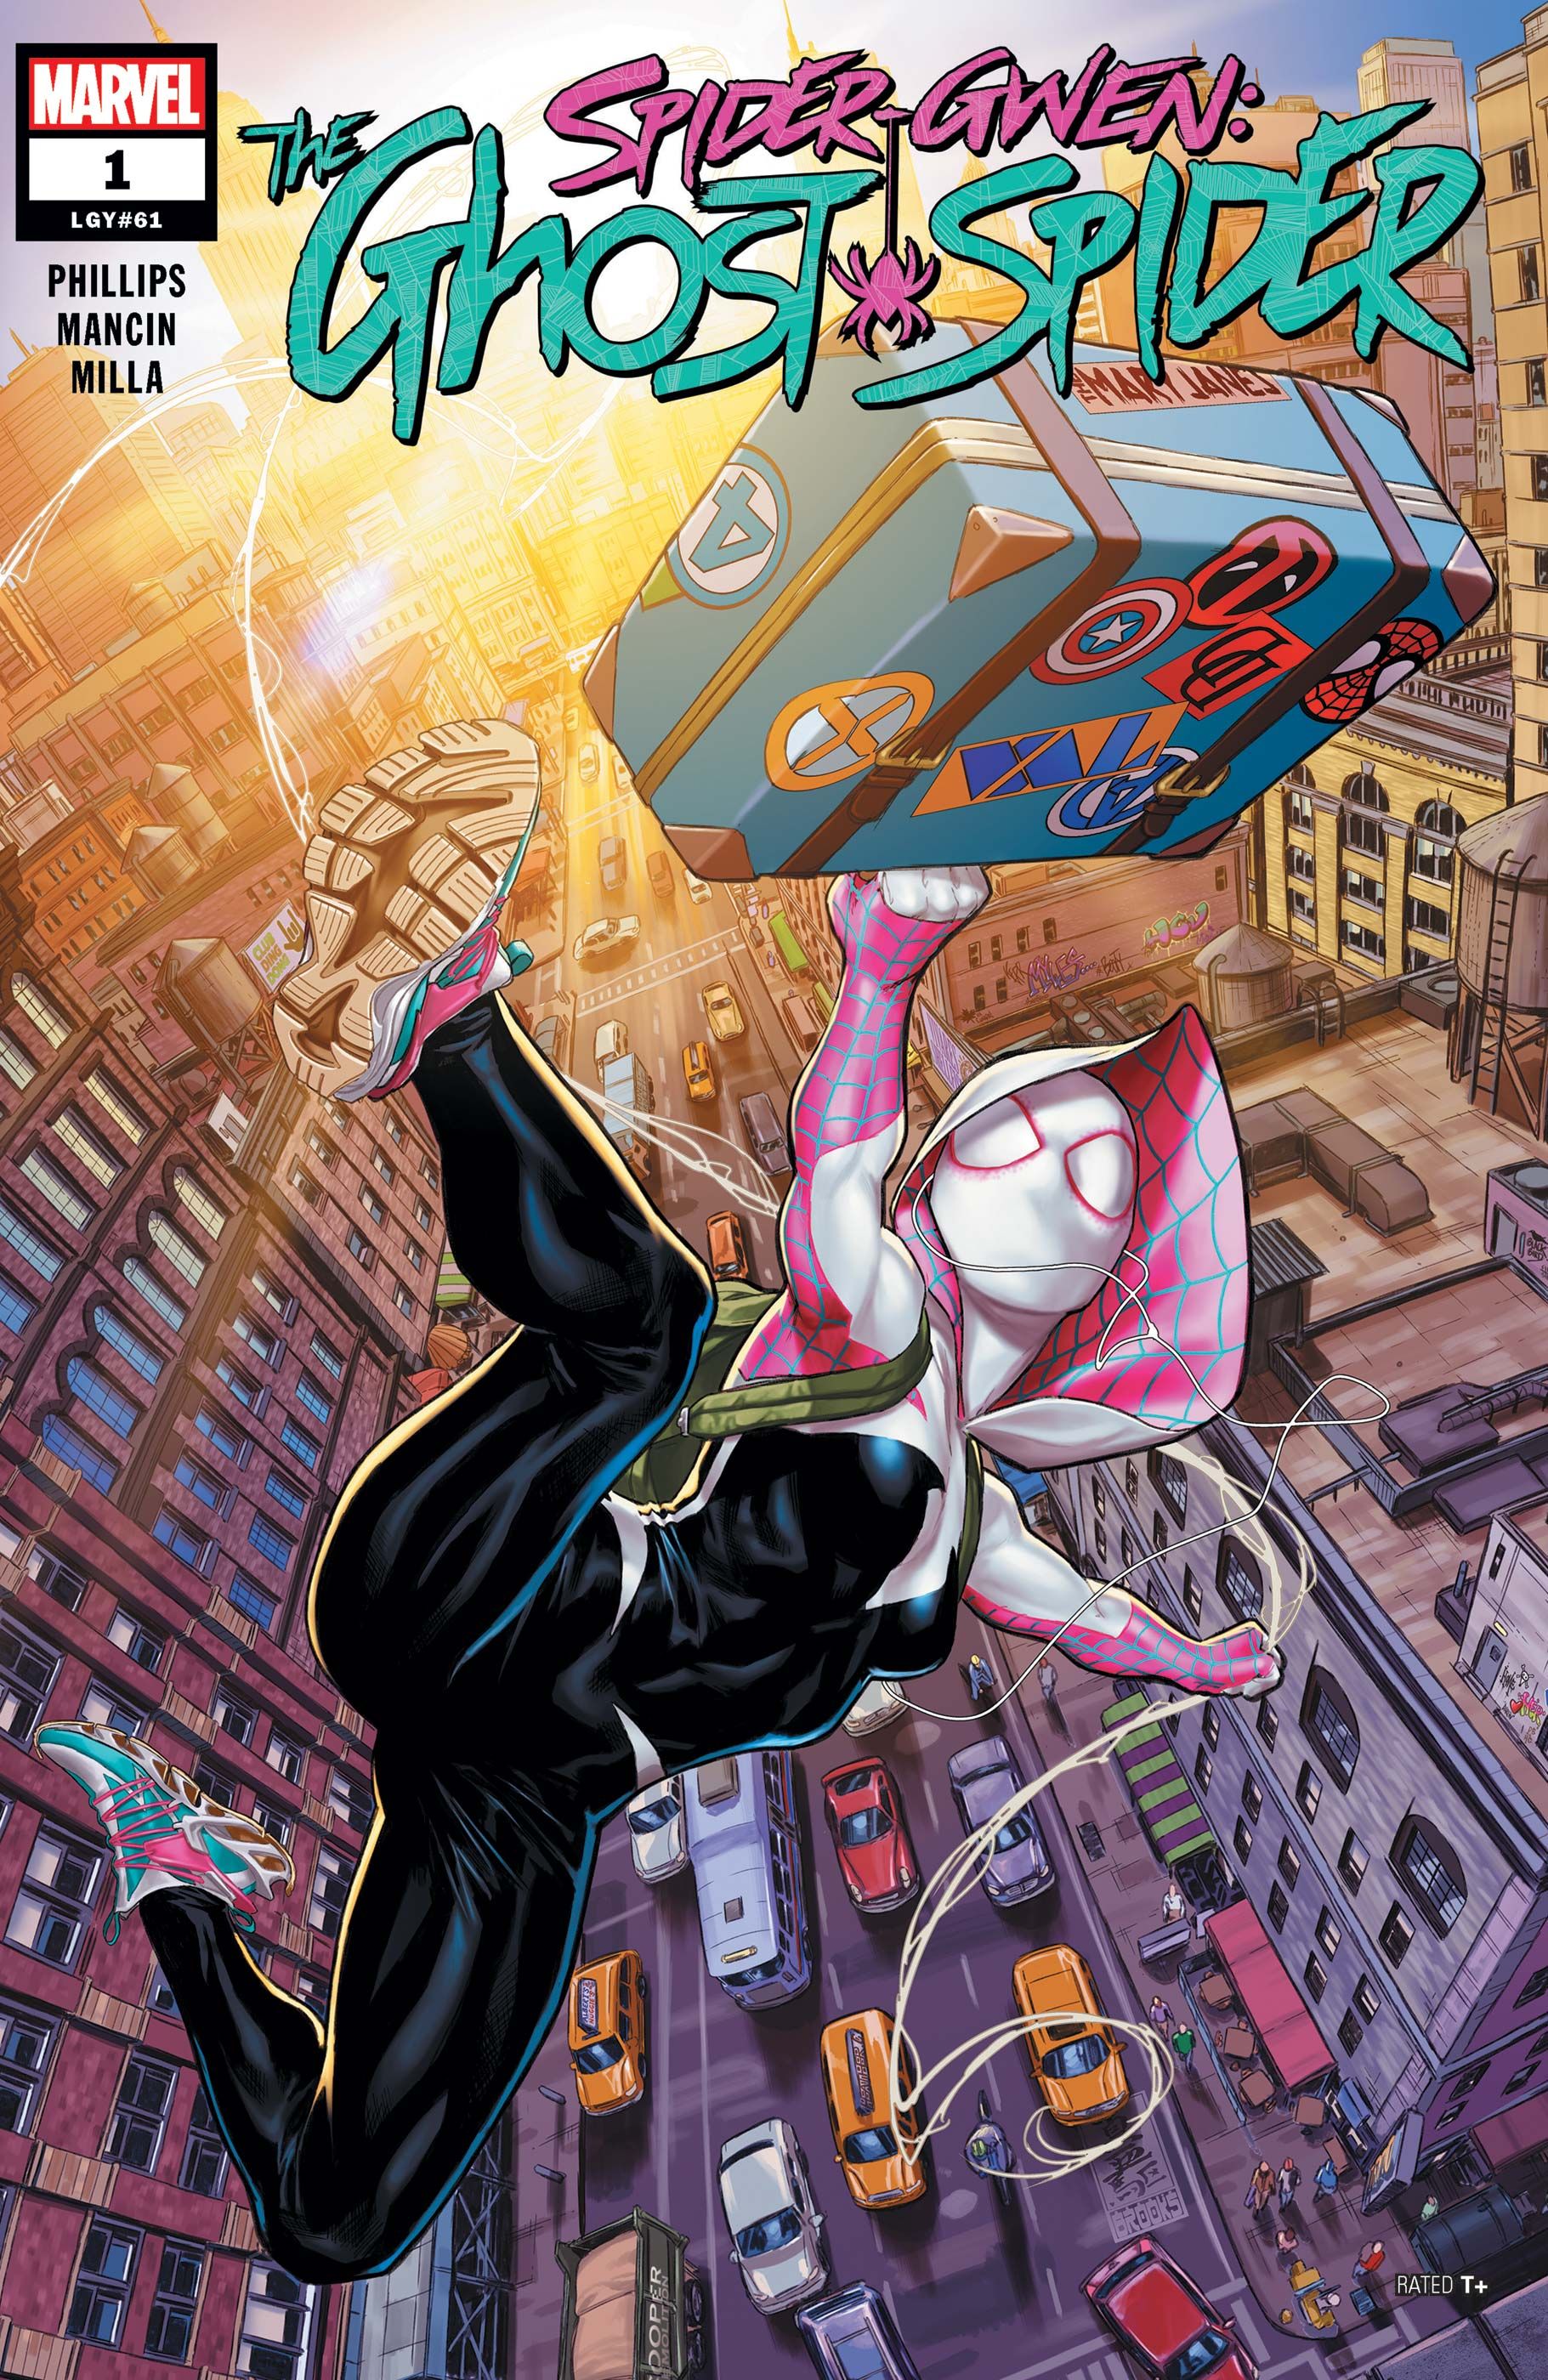 Spider-Gwen with her suitcase swinging above the city